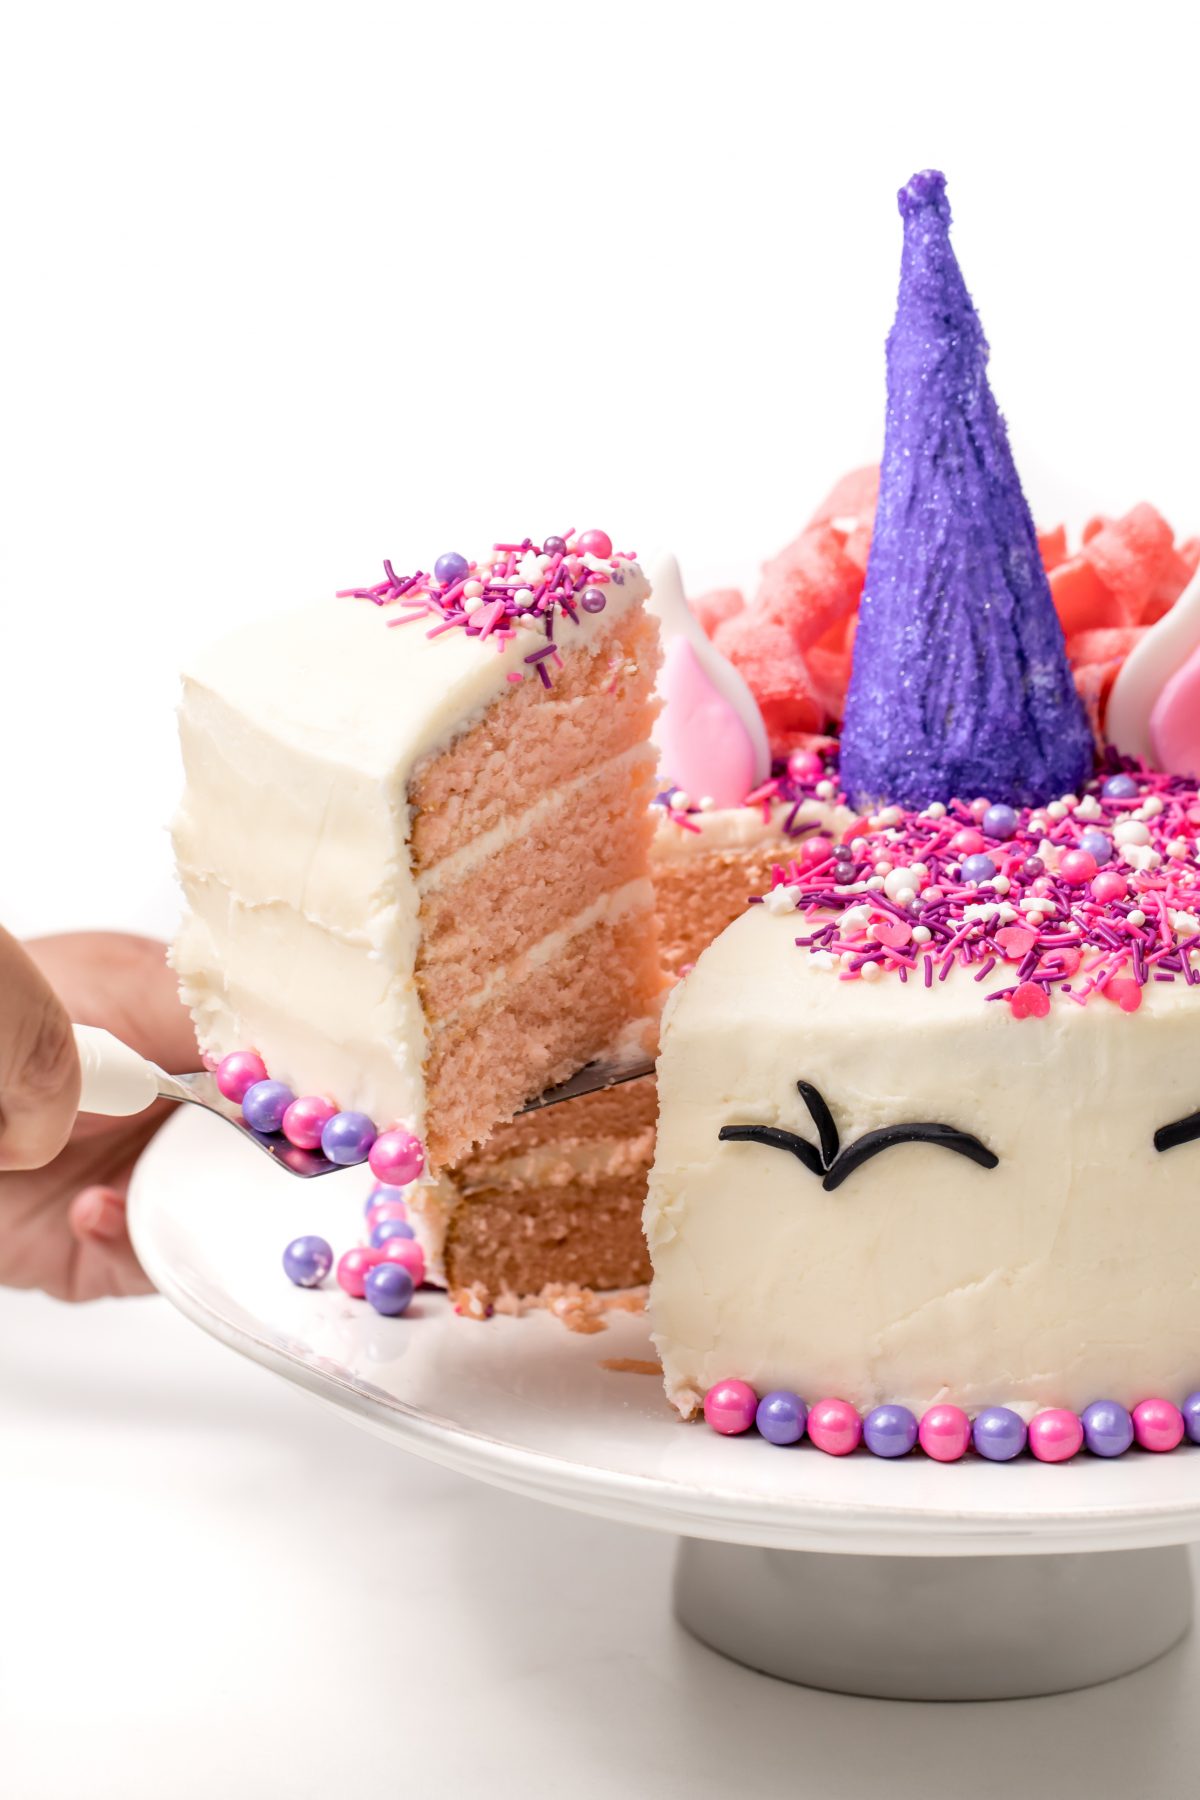 This pink unicorn cake is as delicious as it is pretty